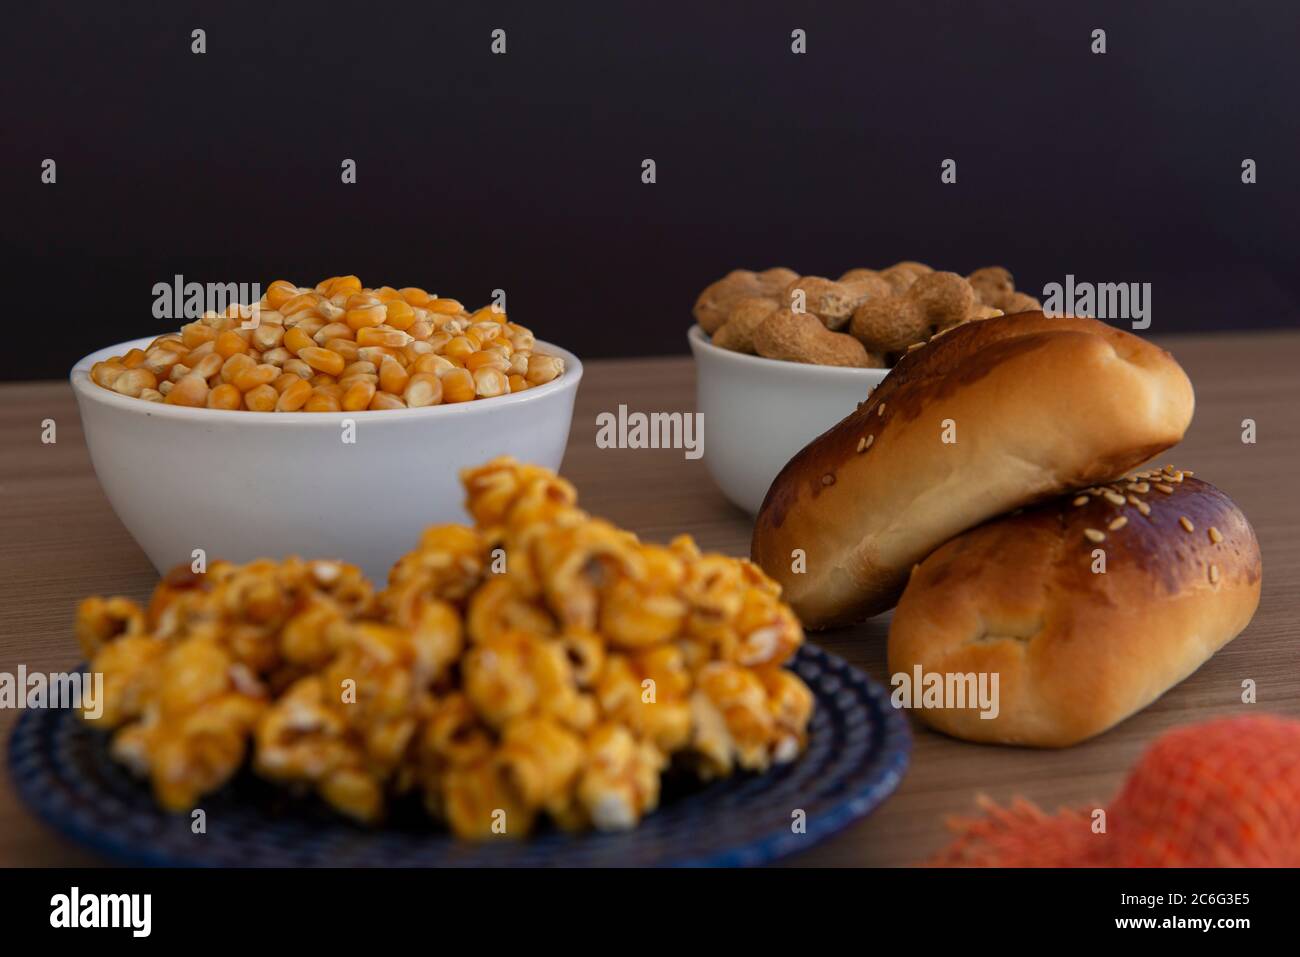 Close up of typical June Party foods on a wooden table: Popcorn, cornmeal cake, corn kernels, peanut pods and small country hats. Copy space. Selectiv Stock Photo